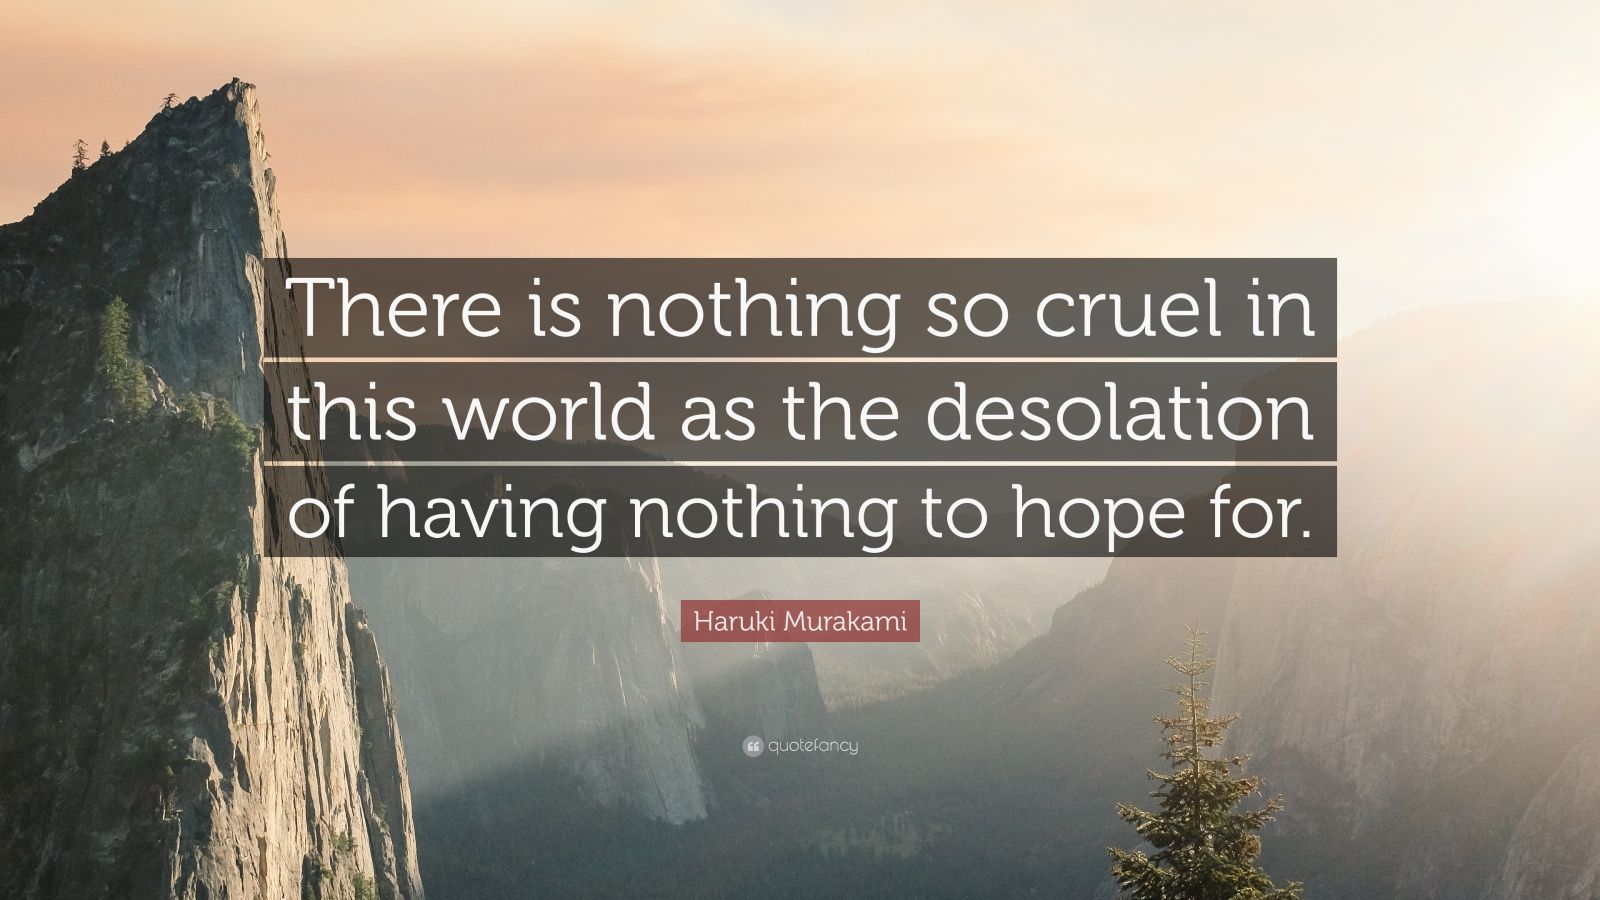 Haruki Murakami Quote: “There is nothing so cruel in this world as